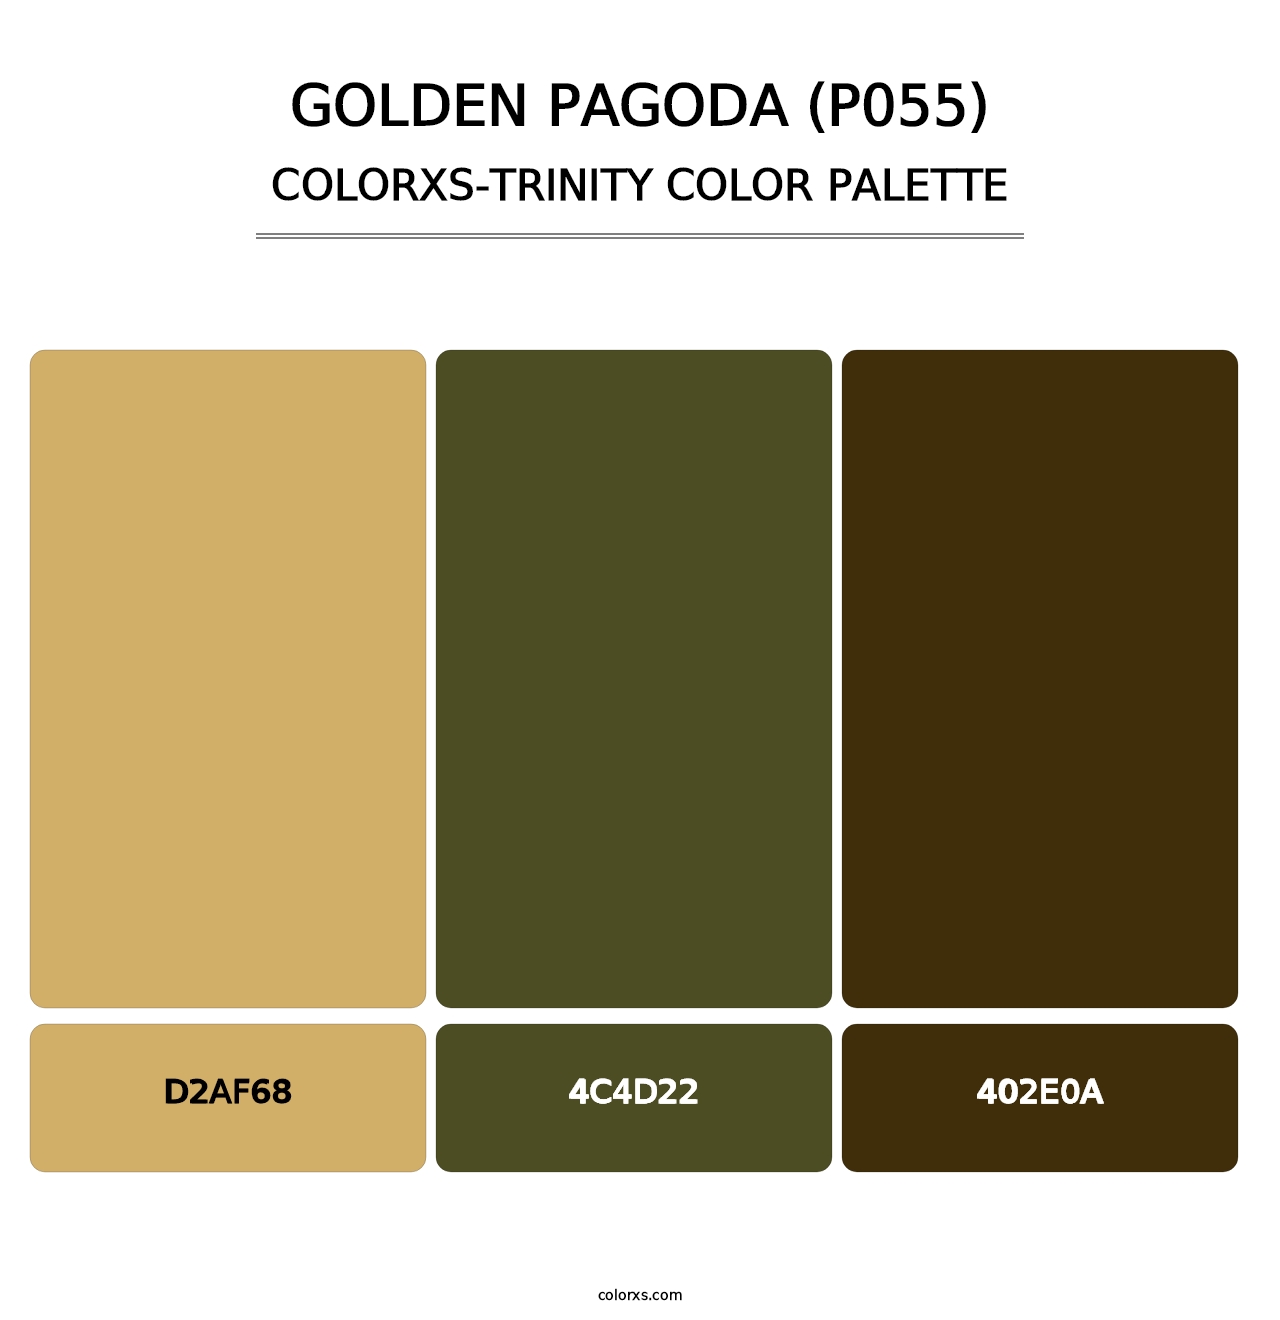 Golden Pagoda (P055) - Colorxs Trinity Palette